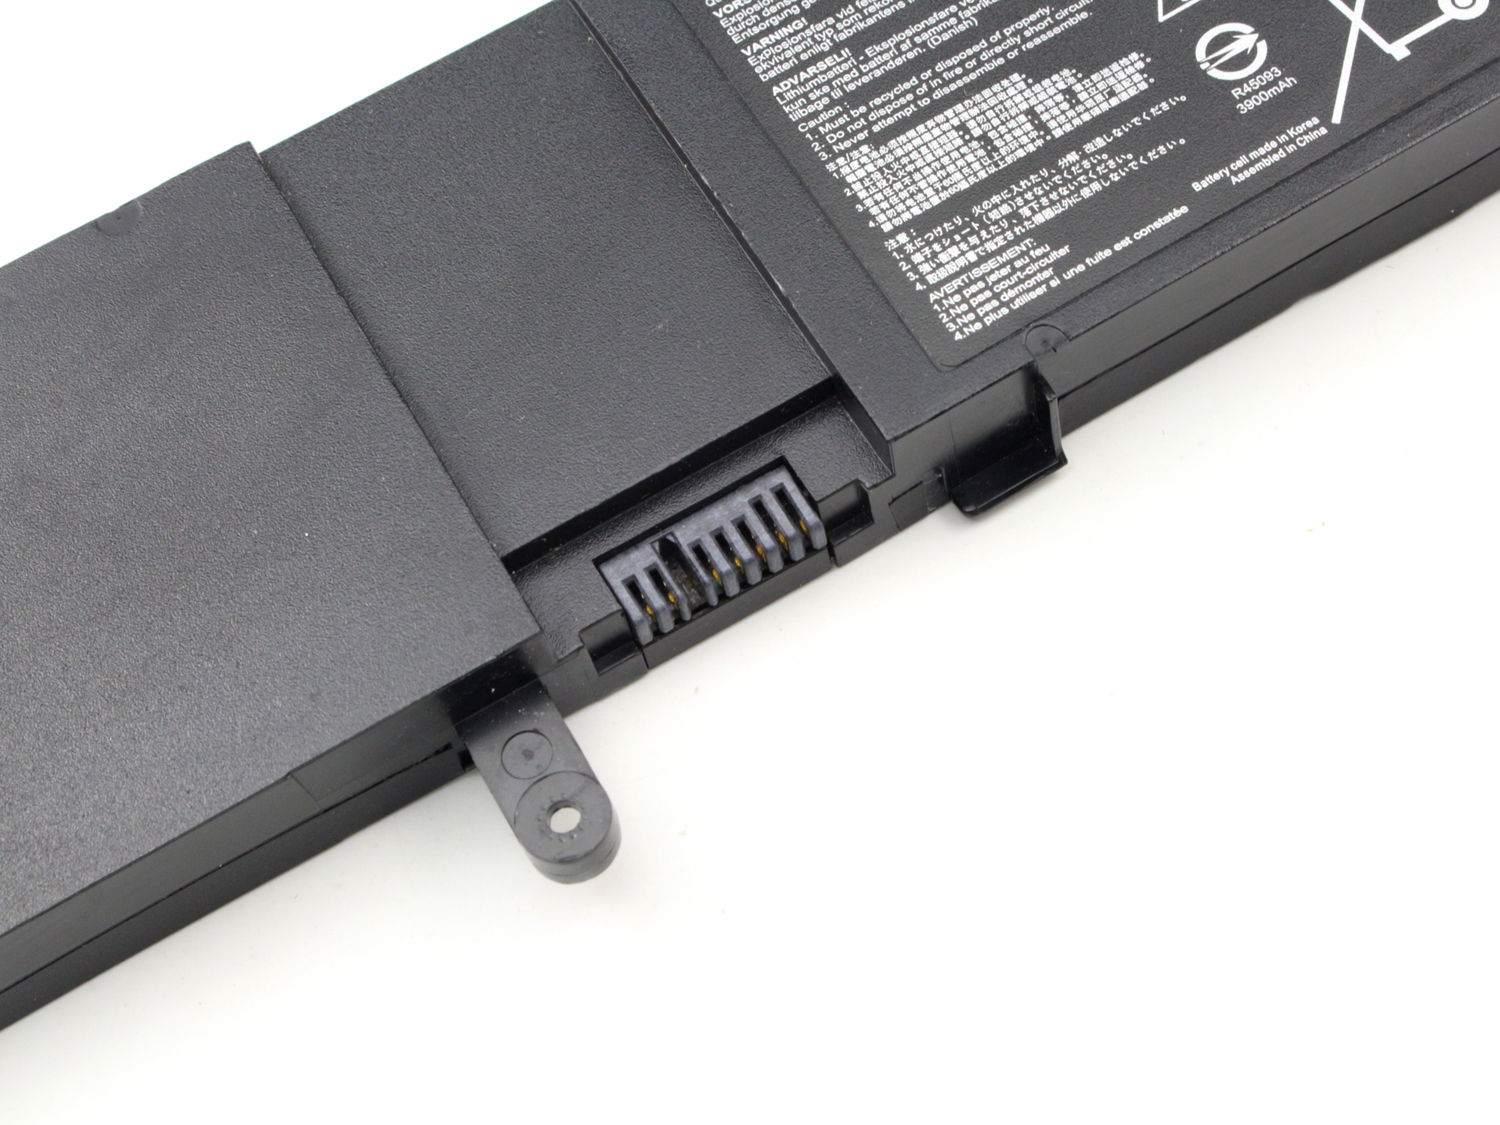 How much does it cost to replace Asus Laptop Battery?